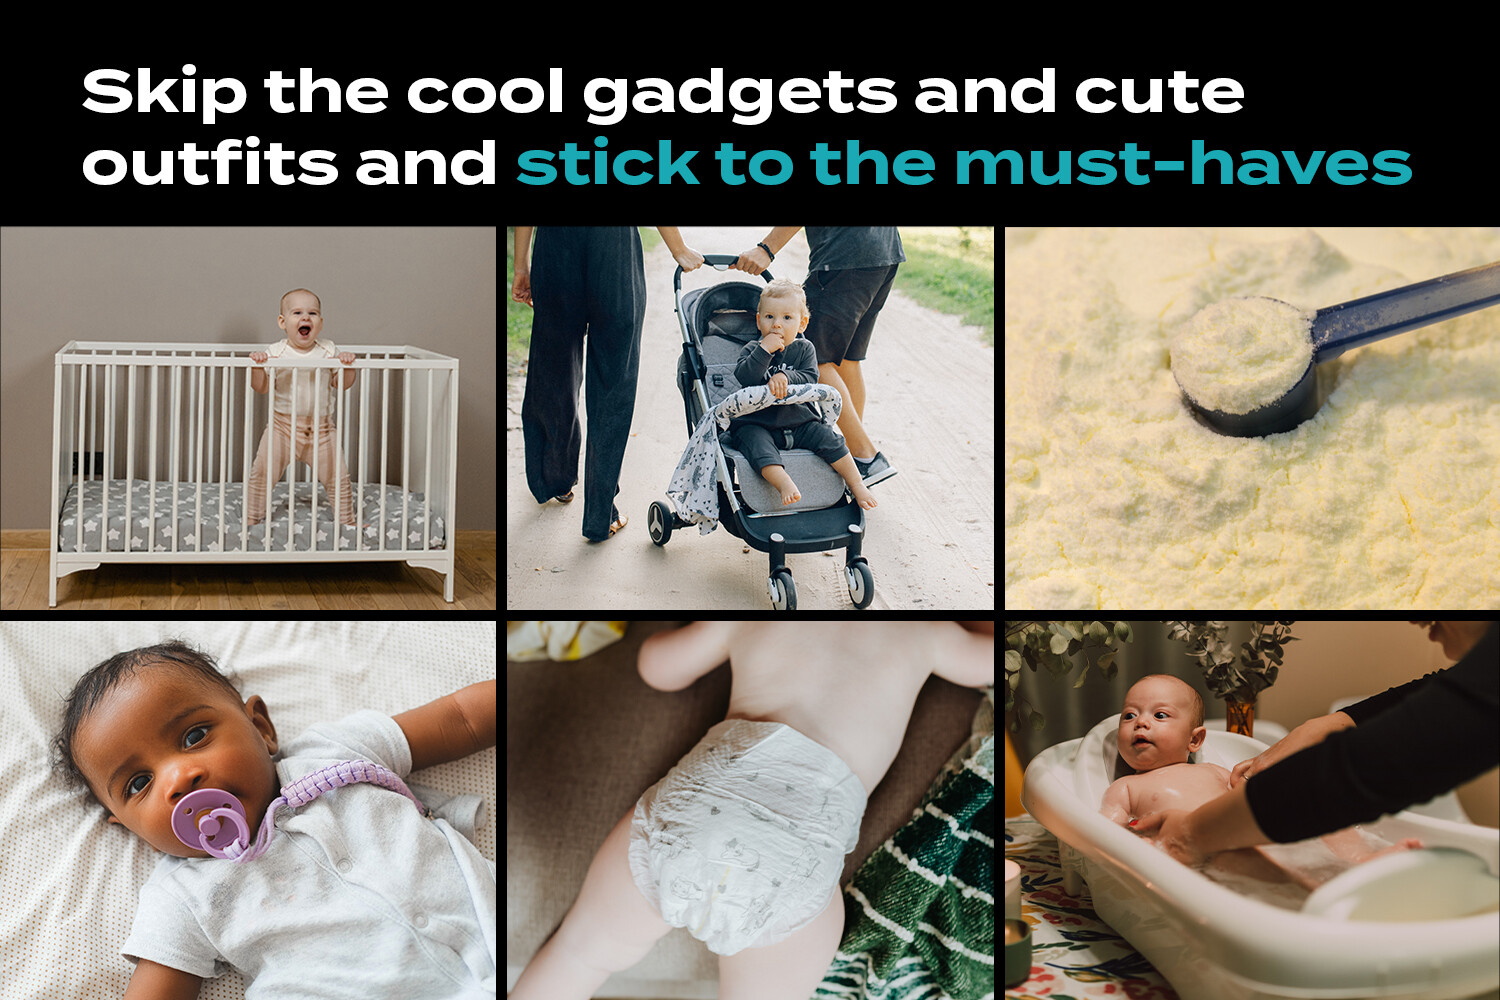 New Baby Checklist: Ultimate Guide to Essential Items